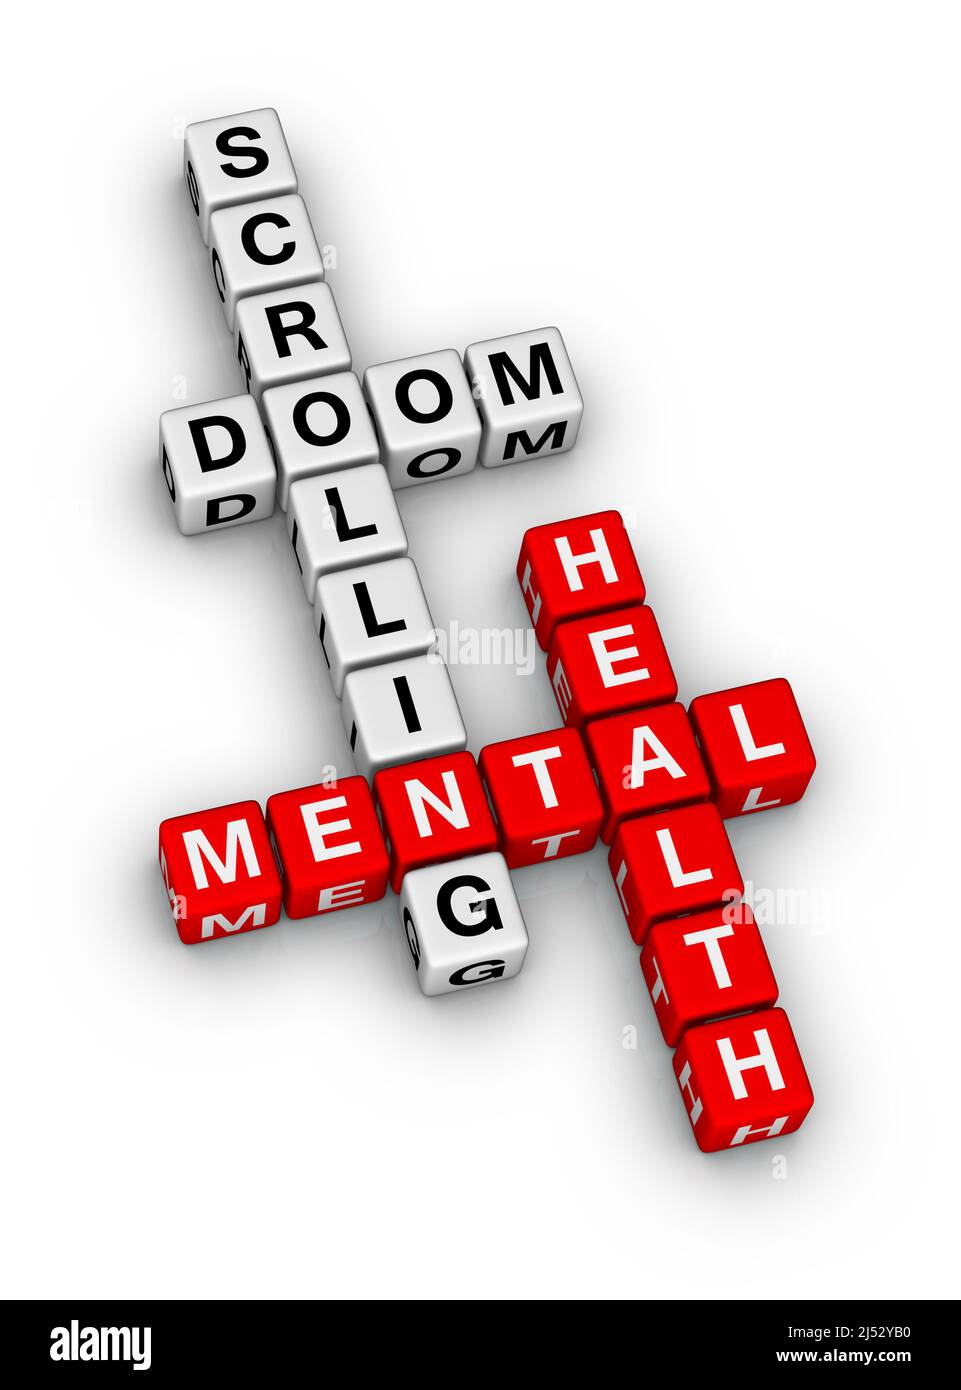 Doomscrolling Mental Health Crossword Puzzle. 3d illustration on White Background Stock Photo